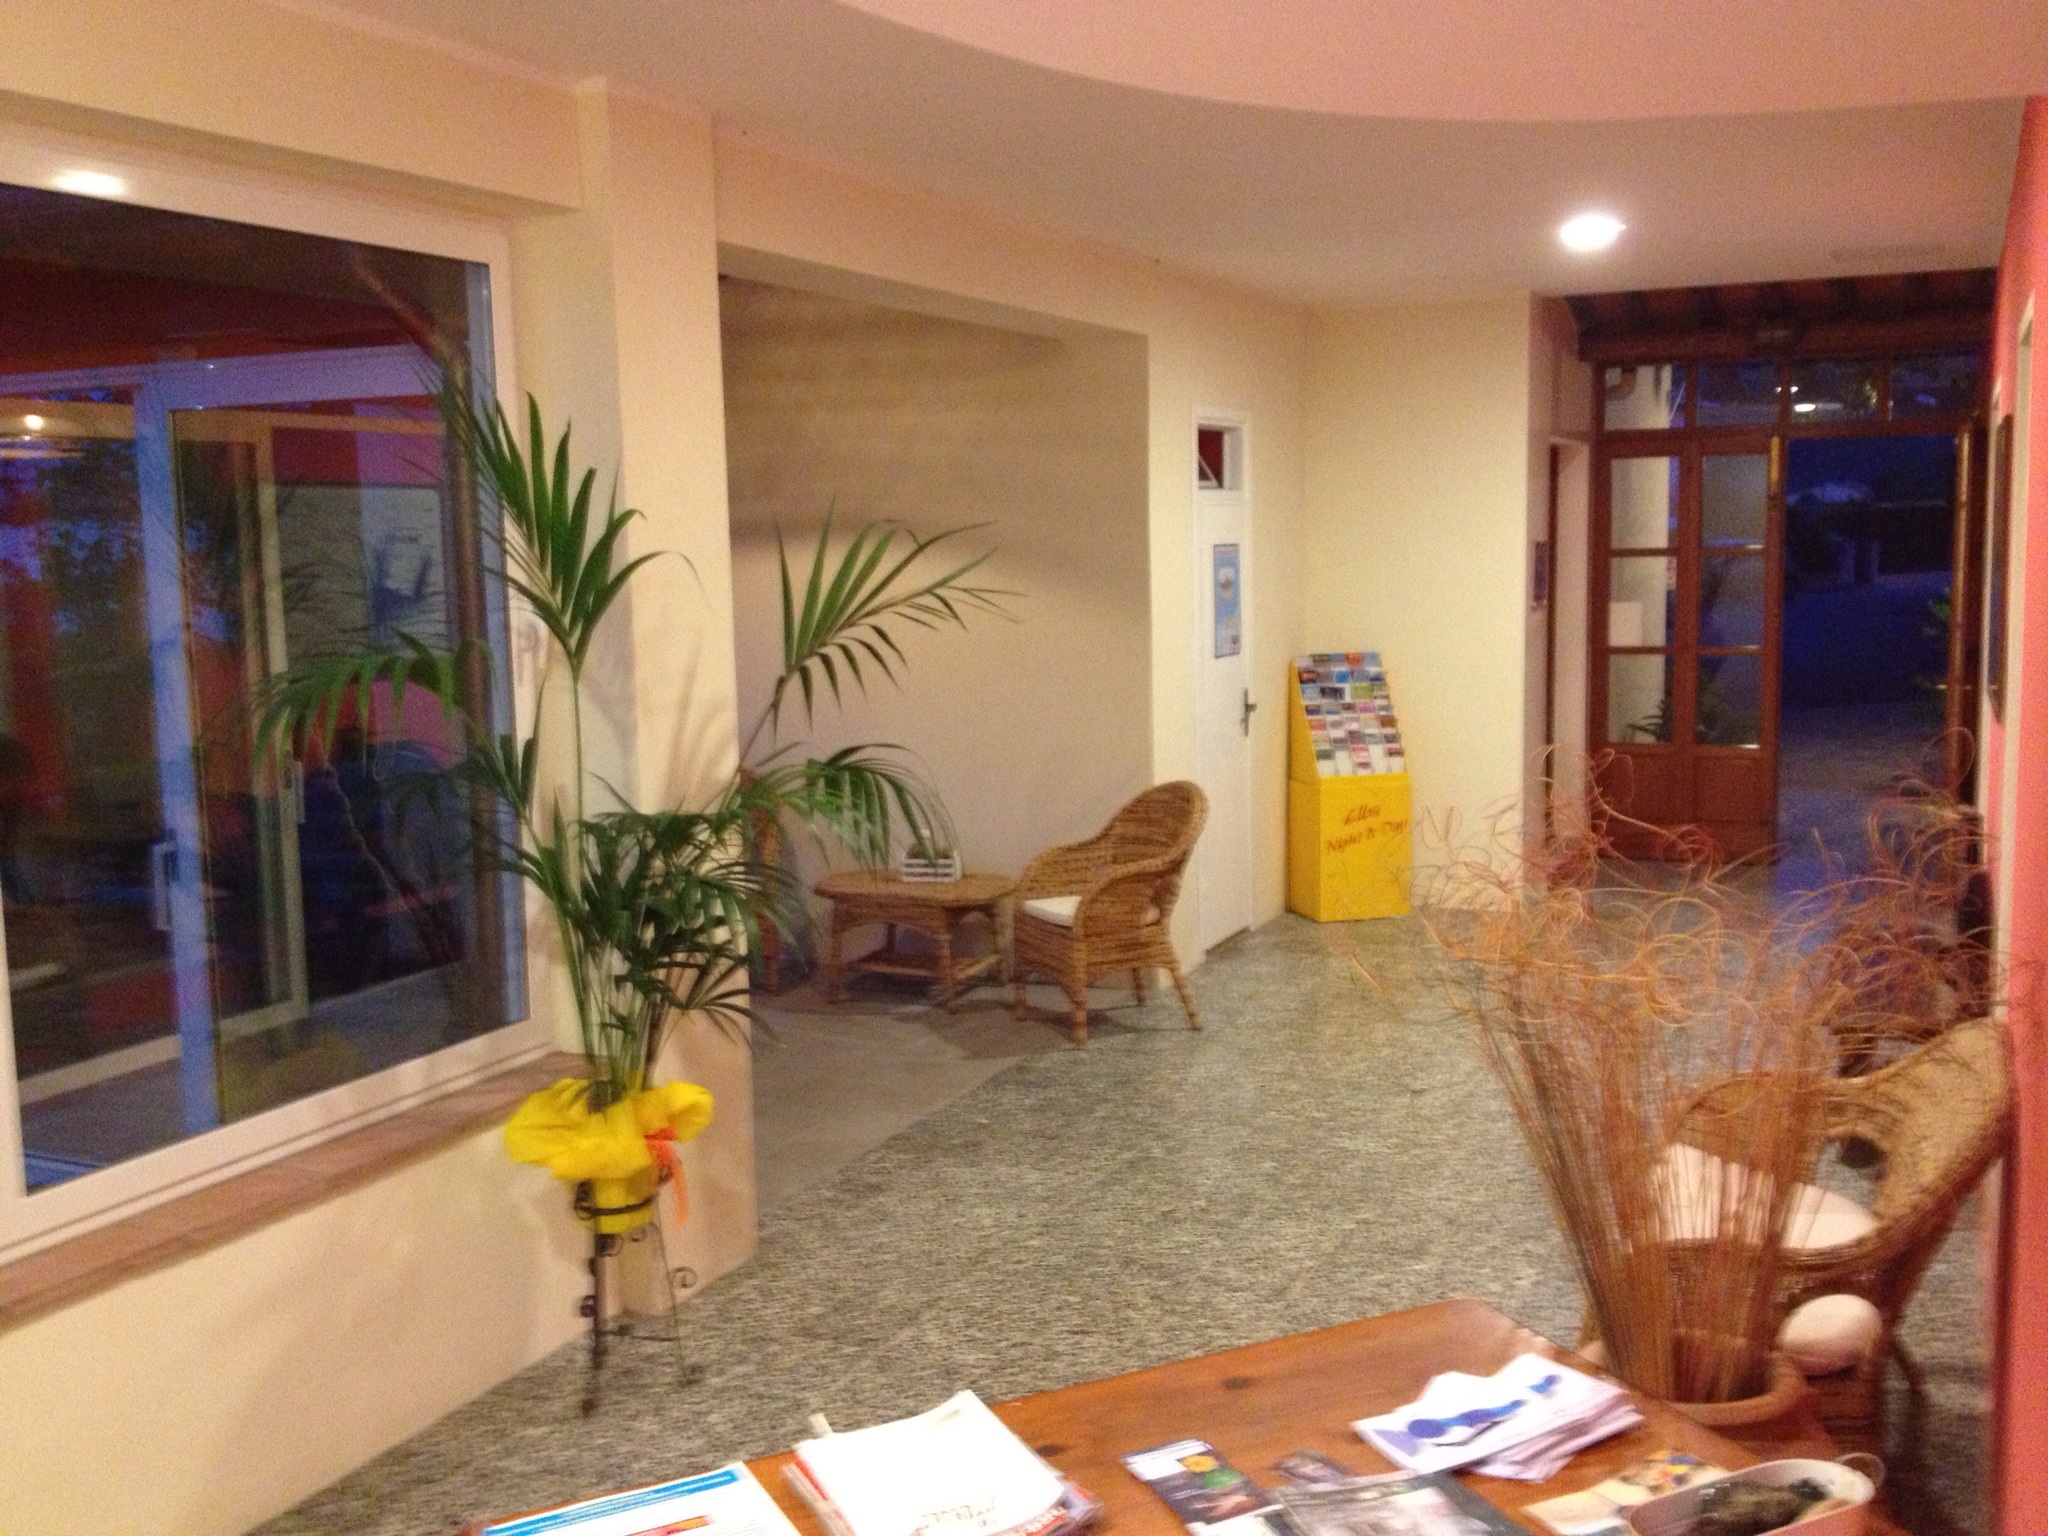 BED AND BREAKFAST CASA LUPI